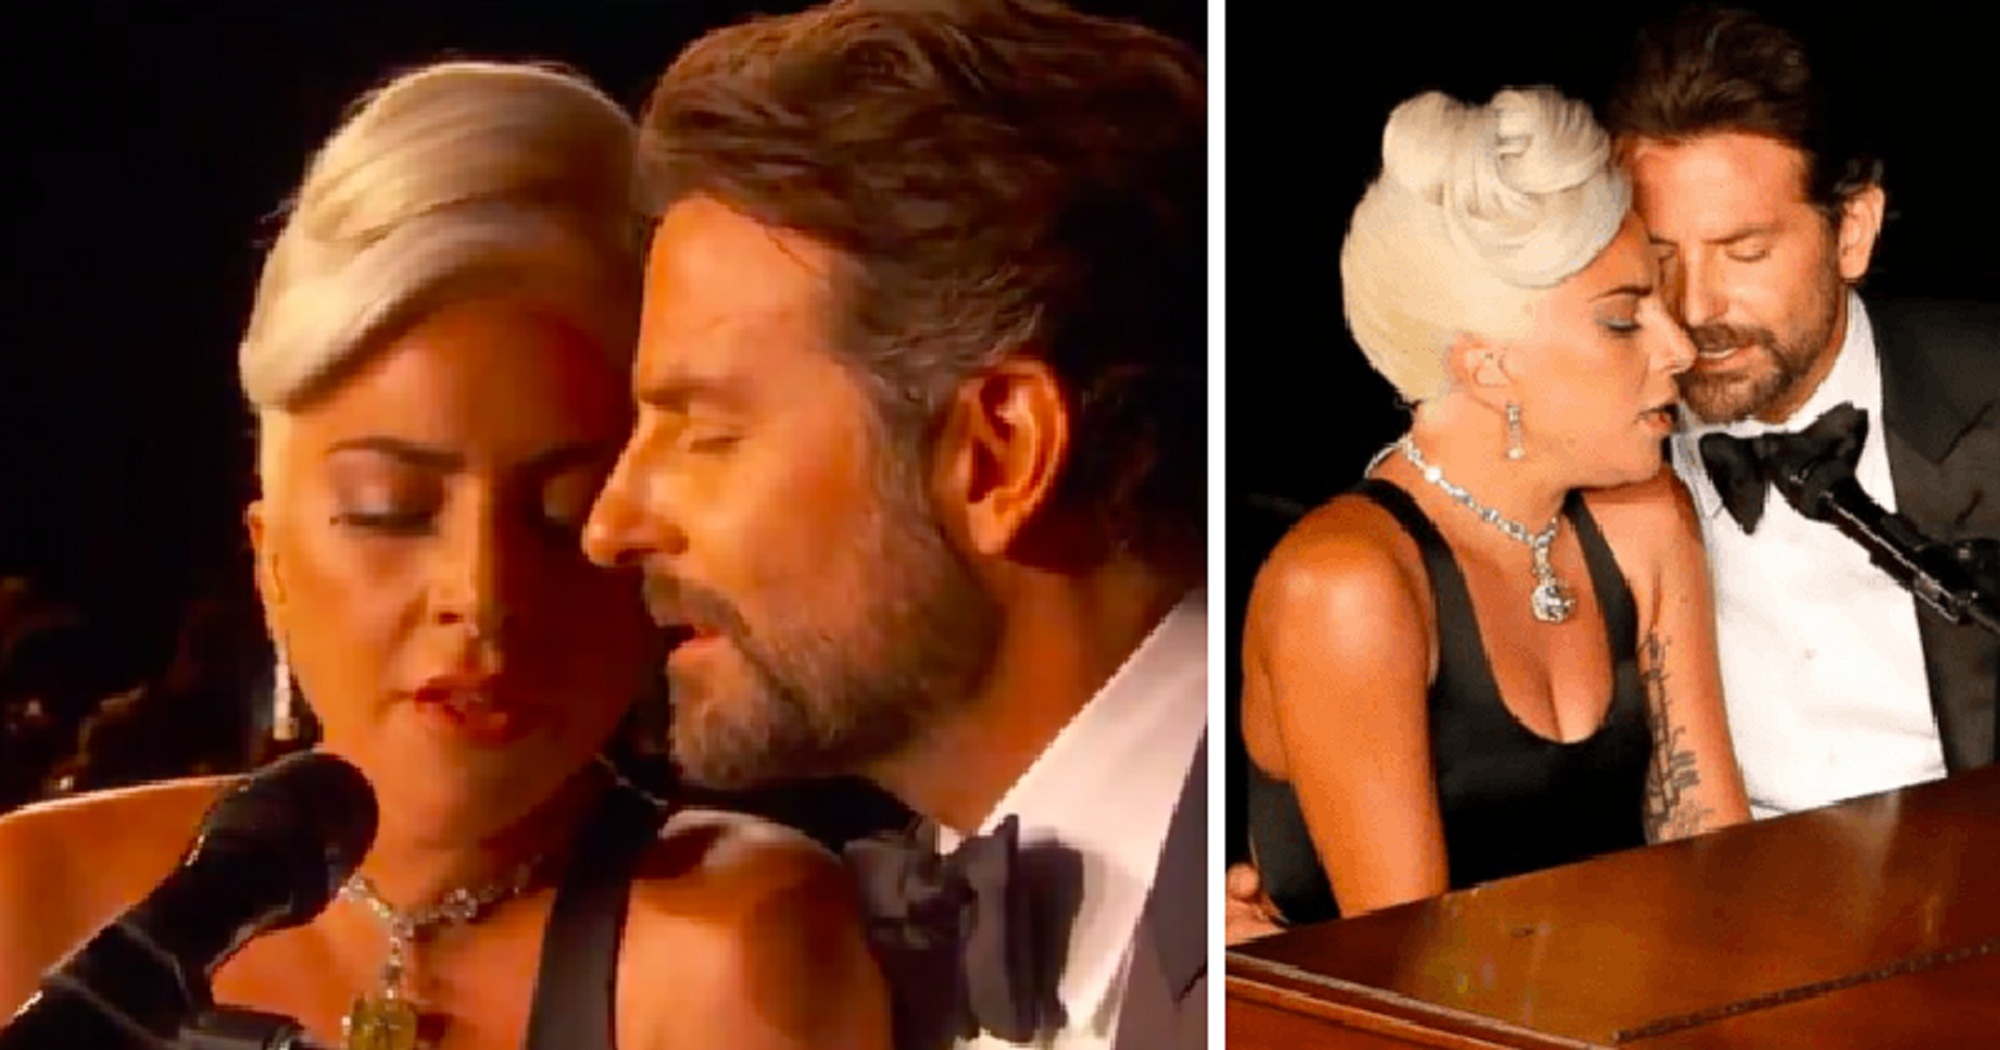 Watch: Lady Gaga and Bradley Cooper Give Passionate Performance at the Oscars